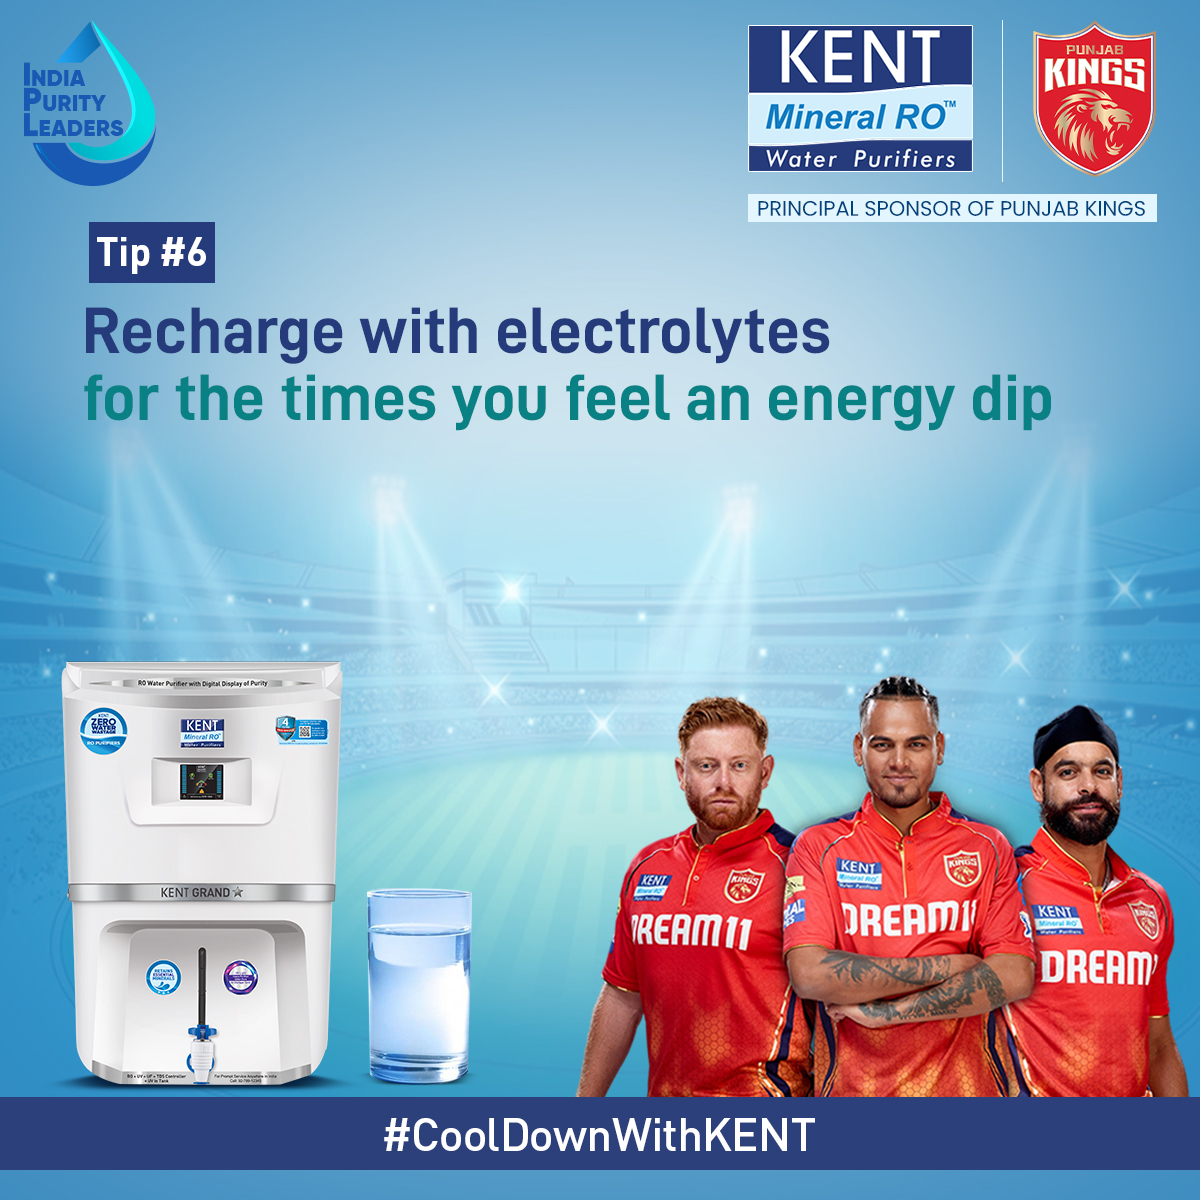 #CoolDownWithKENT​
​
Mix electrolytes with water and get that much-needed boost of energy, back.​
​
#KENTRO #SabseShudhPaani #SummerTips #BeatTheHeat #WaterFilter #PureWater #WaterPurifier #MineralWater #SaddaSquad #PunjabKings #KENTROSystems